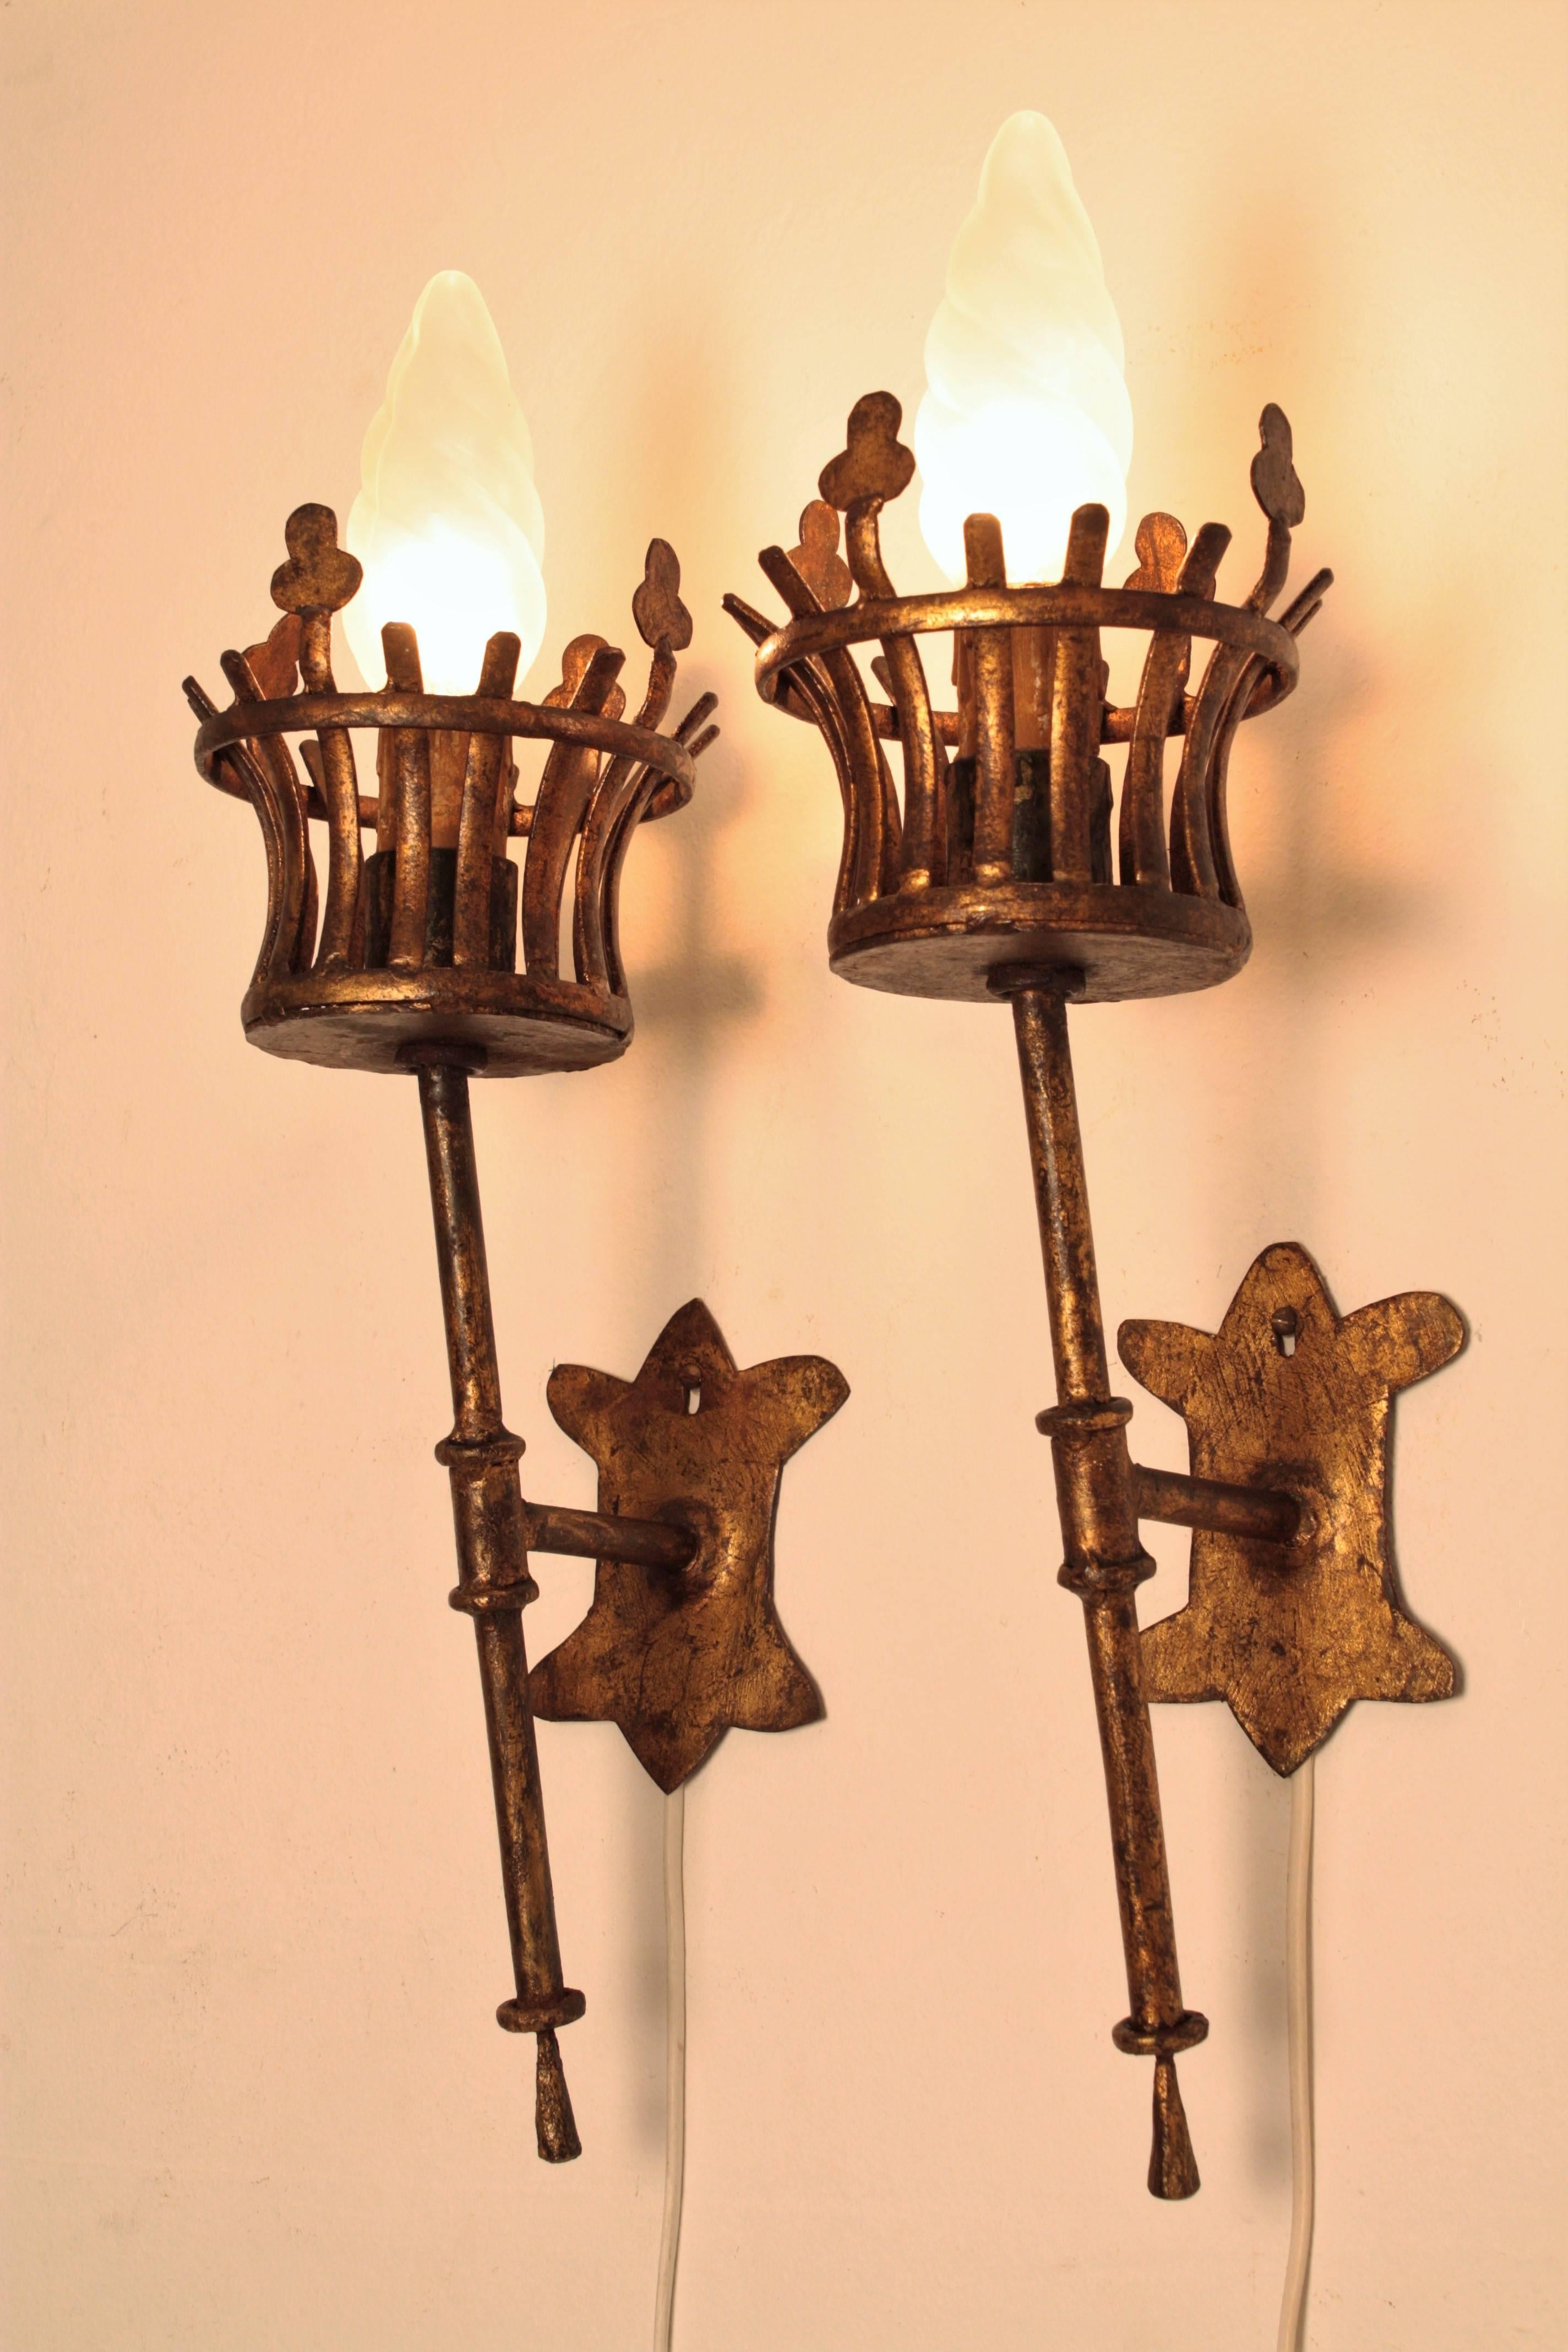 A pair of hand-hammered iron torch wall sconces with gold leaf finish and gorgeous original patina in Medieval style.
These pieces were handcrafted and have highly decorative shapes. They have been new rewired.
France, 1930s-1940s.

Available